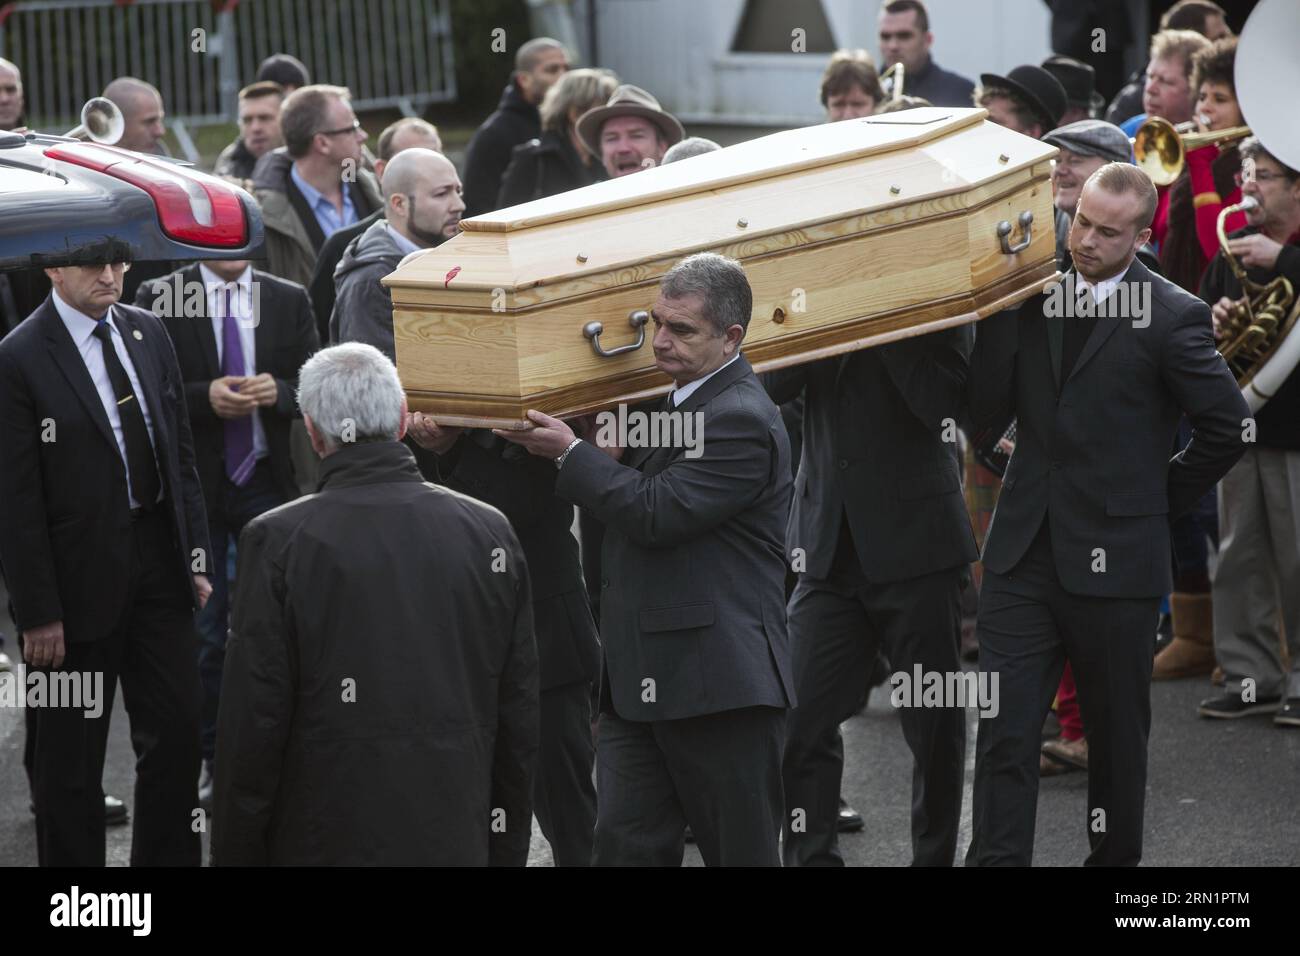 AKTUELLES ZEITGESCHEHEN Trauerfeier für Charlie Hebdo Chef Stephane Charbonnier (150116) -- PARIS, Jan. 16, 2015 -- Pallbearers carry the casket of slain Charlie Hebdo editor-in-chief Stephane Charbonnier (who publishes under the pen name Charb) during his funeral in Pontoise, outside Paris, Jan. 16, 2015. ) FRANCE-PONTOISE-CHARB-FUNERAL JosexRodriguez PUBLICATIONxNOTxINxCHN   News Current events Mourning ceremony for Charlie Hebdo Boss Stephane Charbonnier  Paris Jan 16 2015 Pallbearers Carry The casket of Slain Charlie Hebdo Editor in Chief Stephane Charbonnier Who  Under The Pen Name Charbs Stock Photo